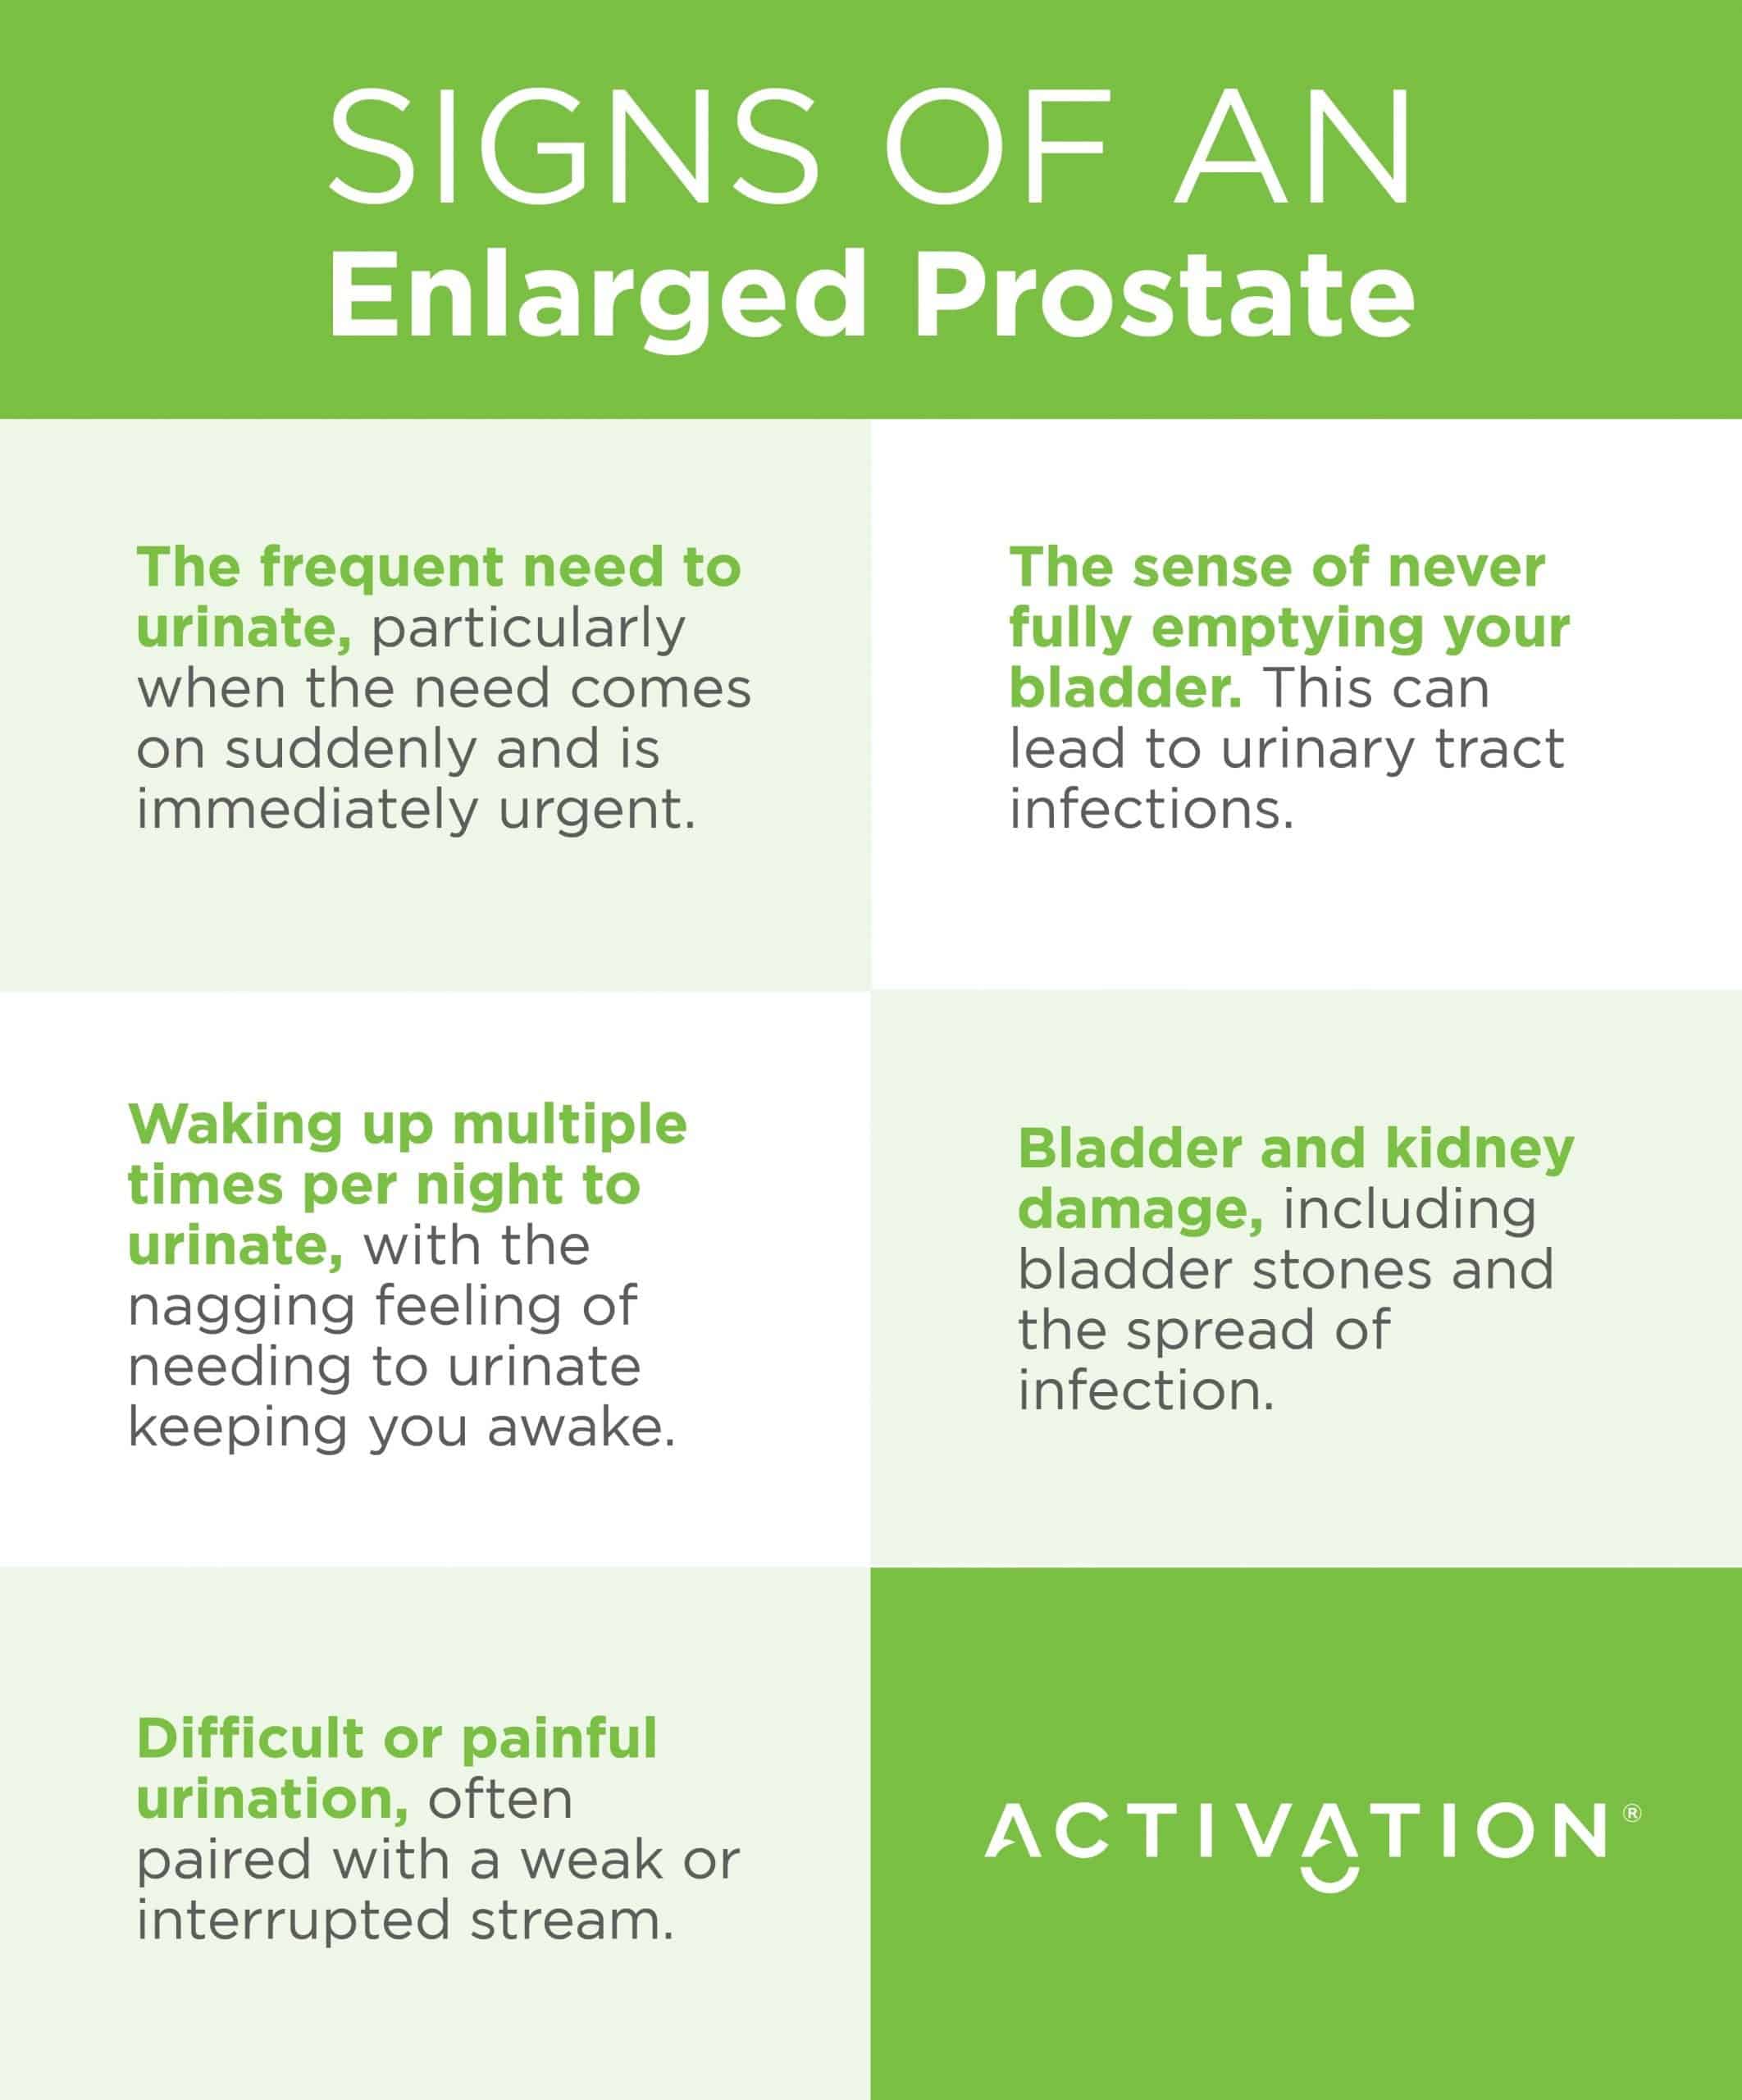 How To Help Enlarged Prostate